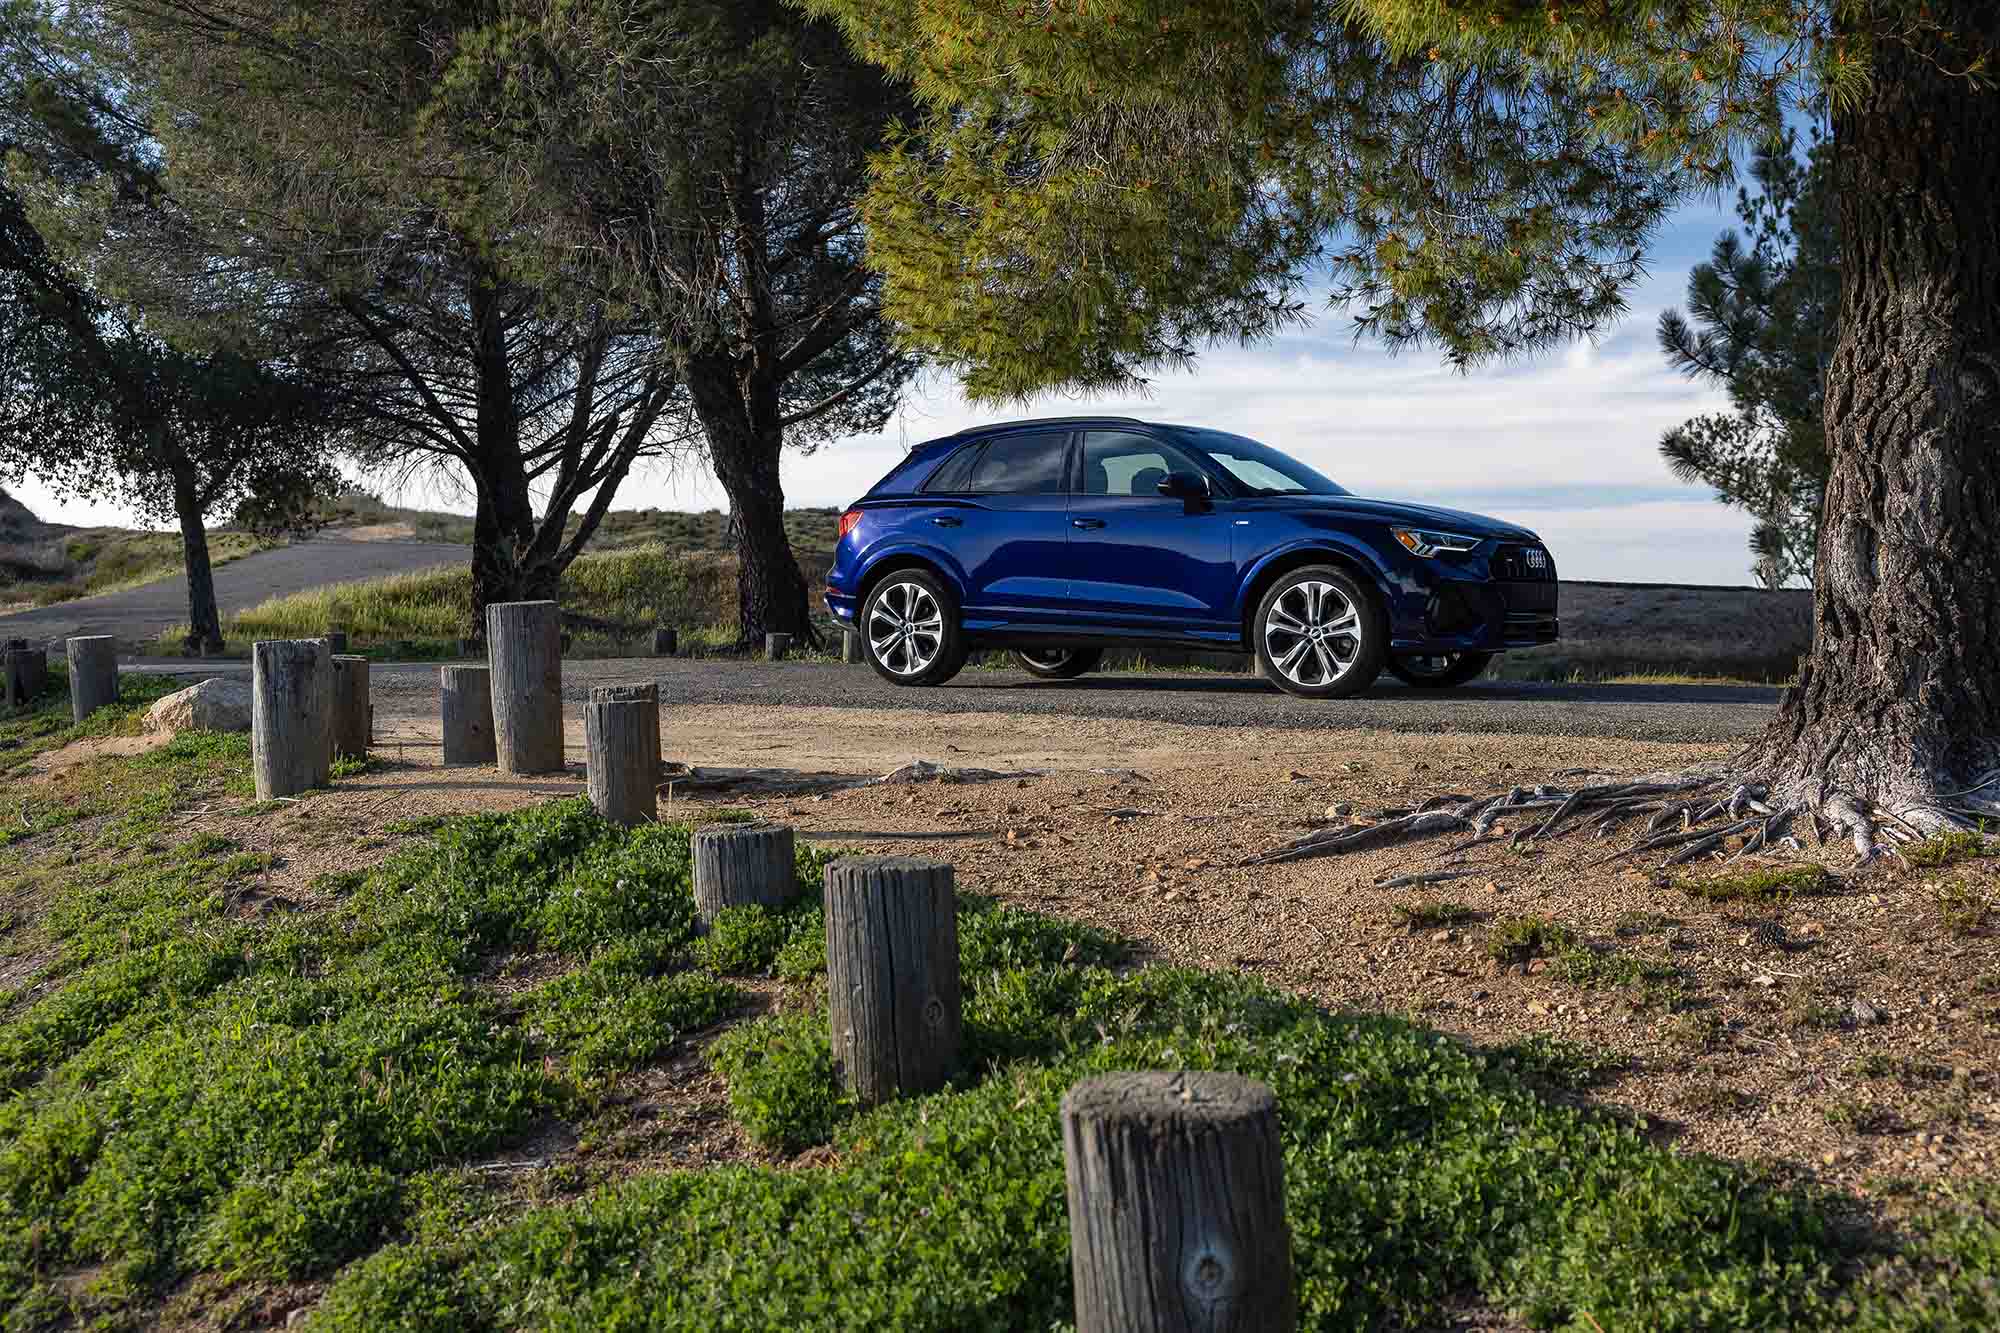 Blue Audi Q3 in park with trees